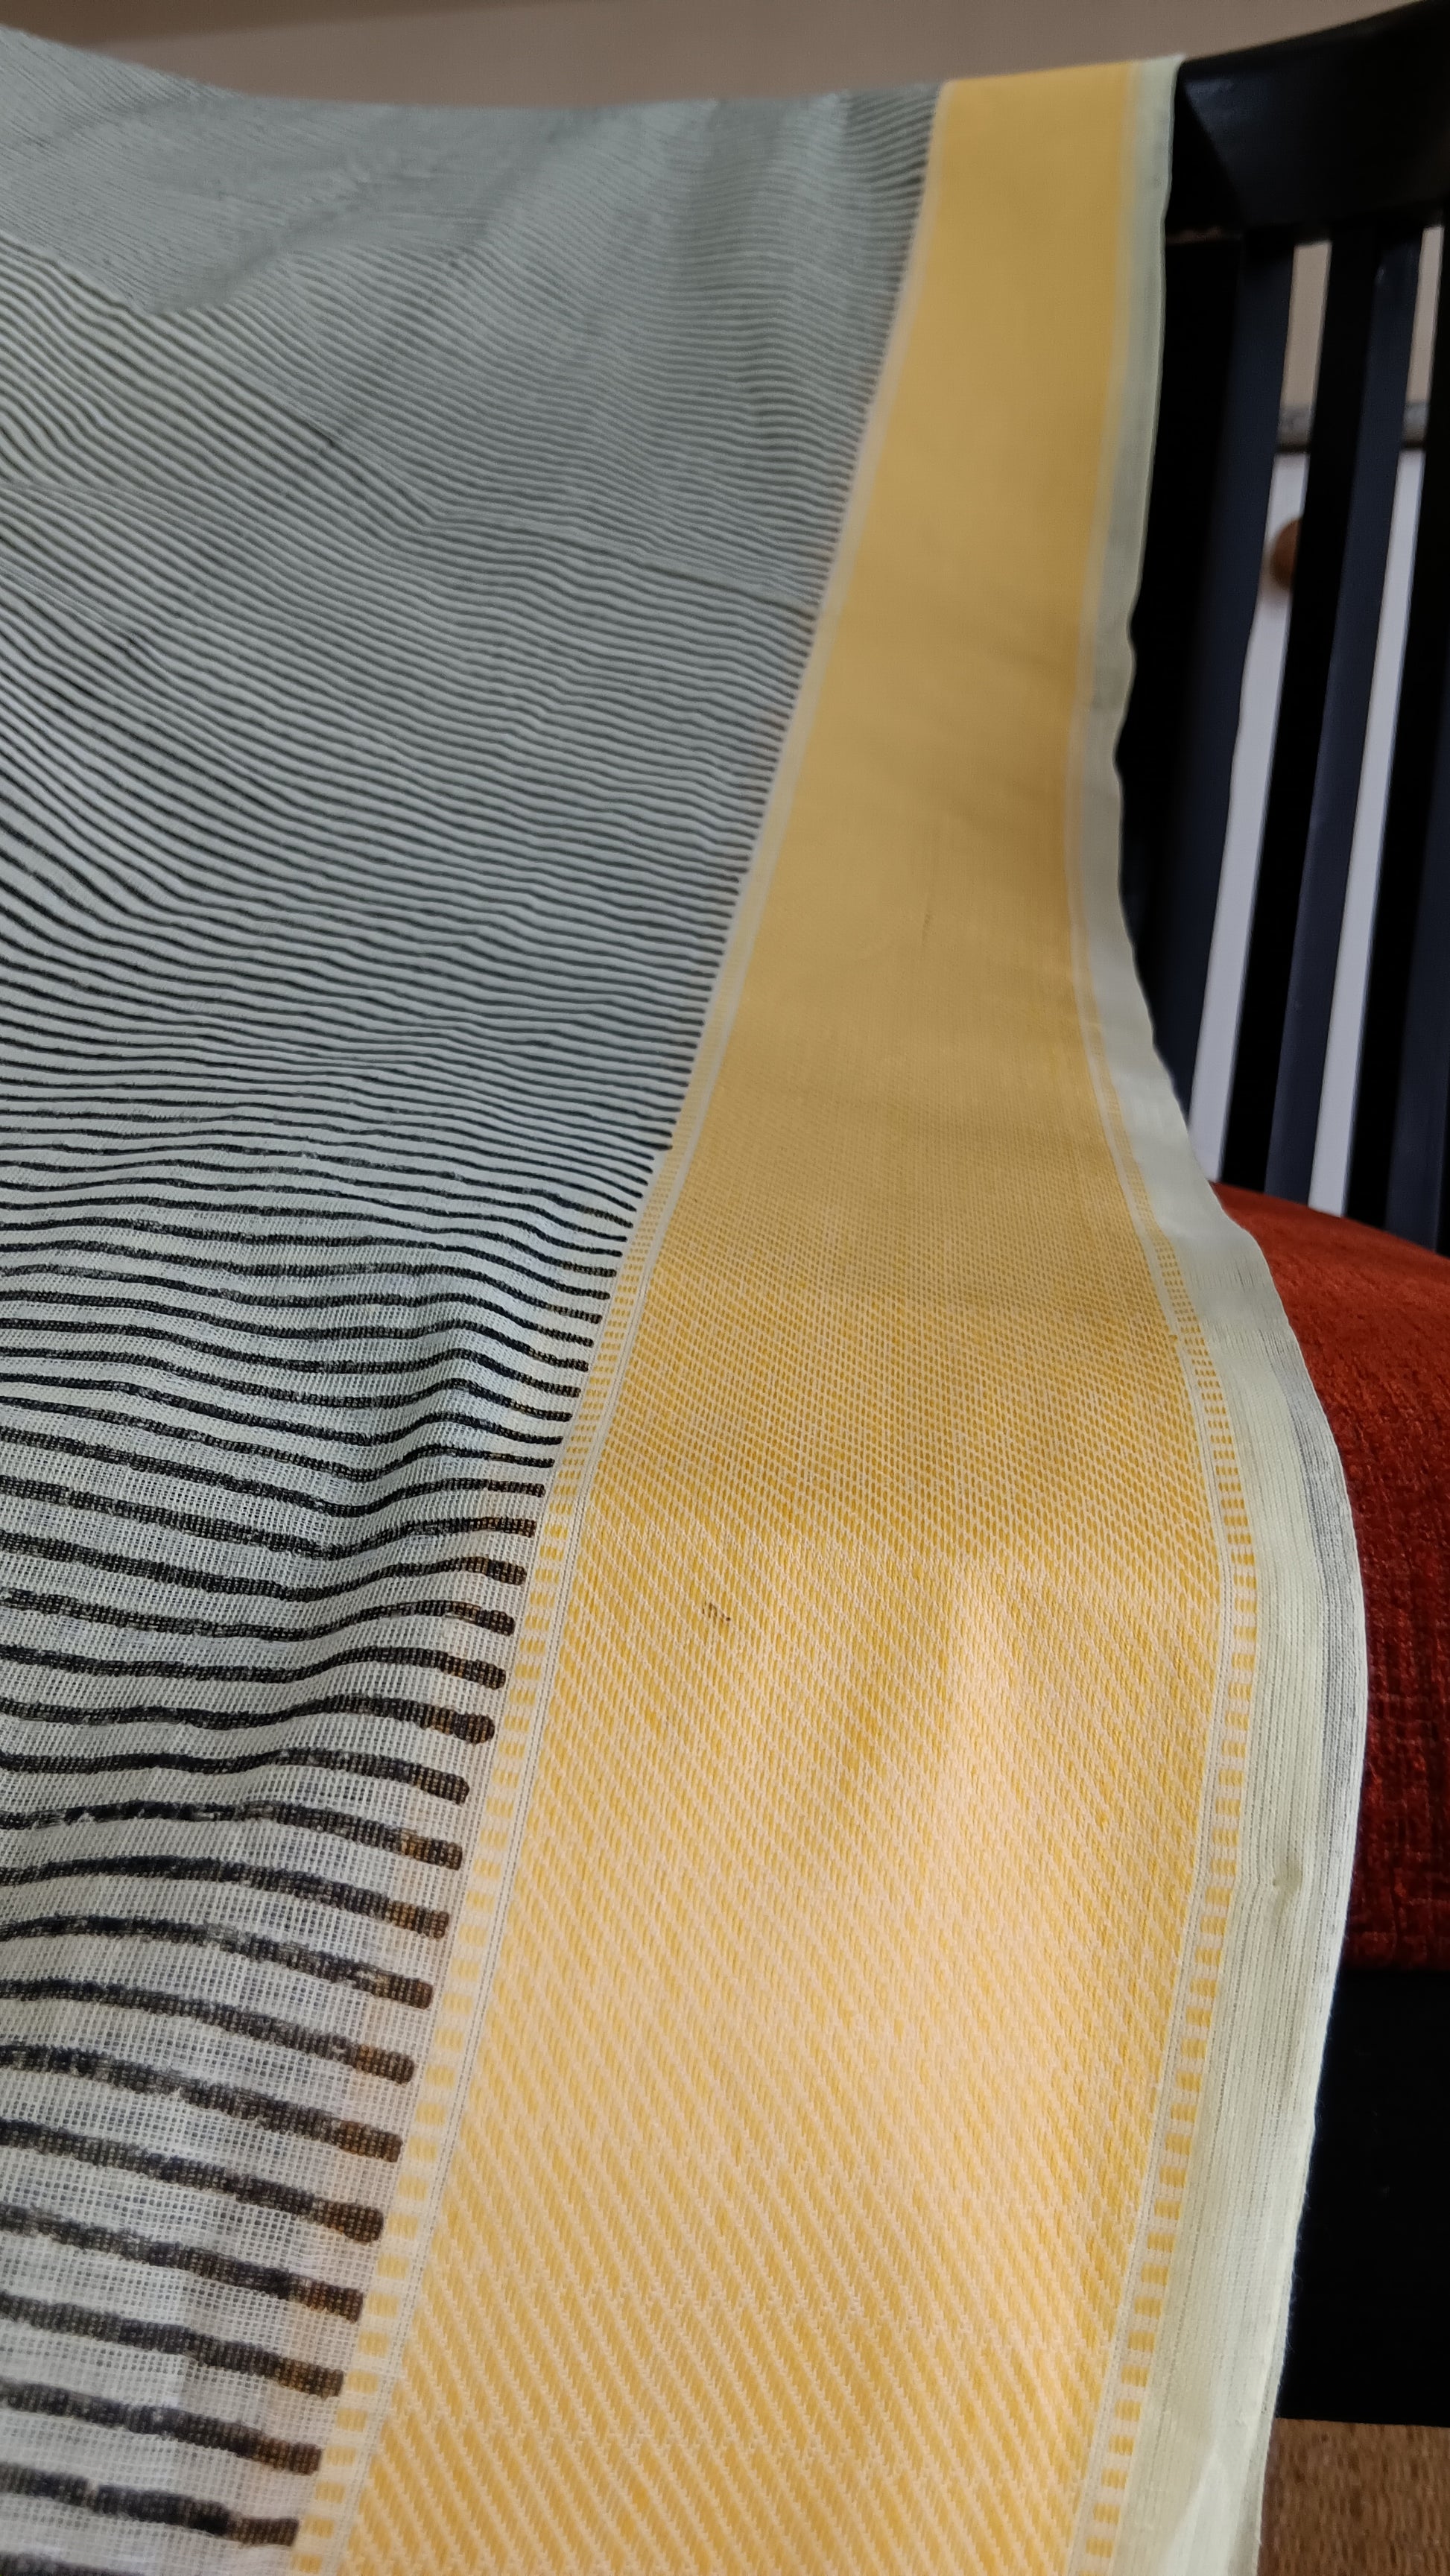 close up view of the yellow border of a daily wear cotton saree